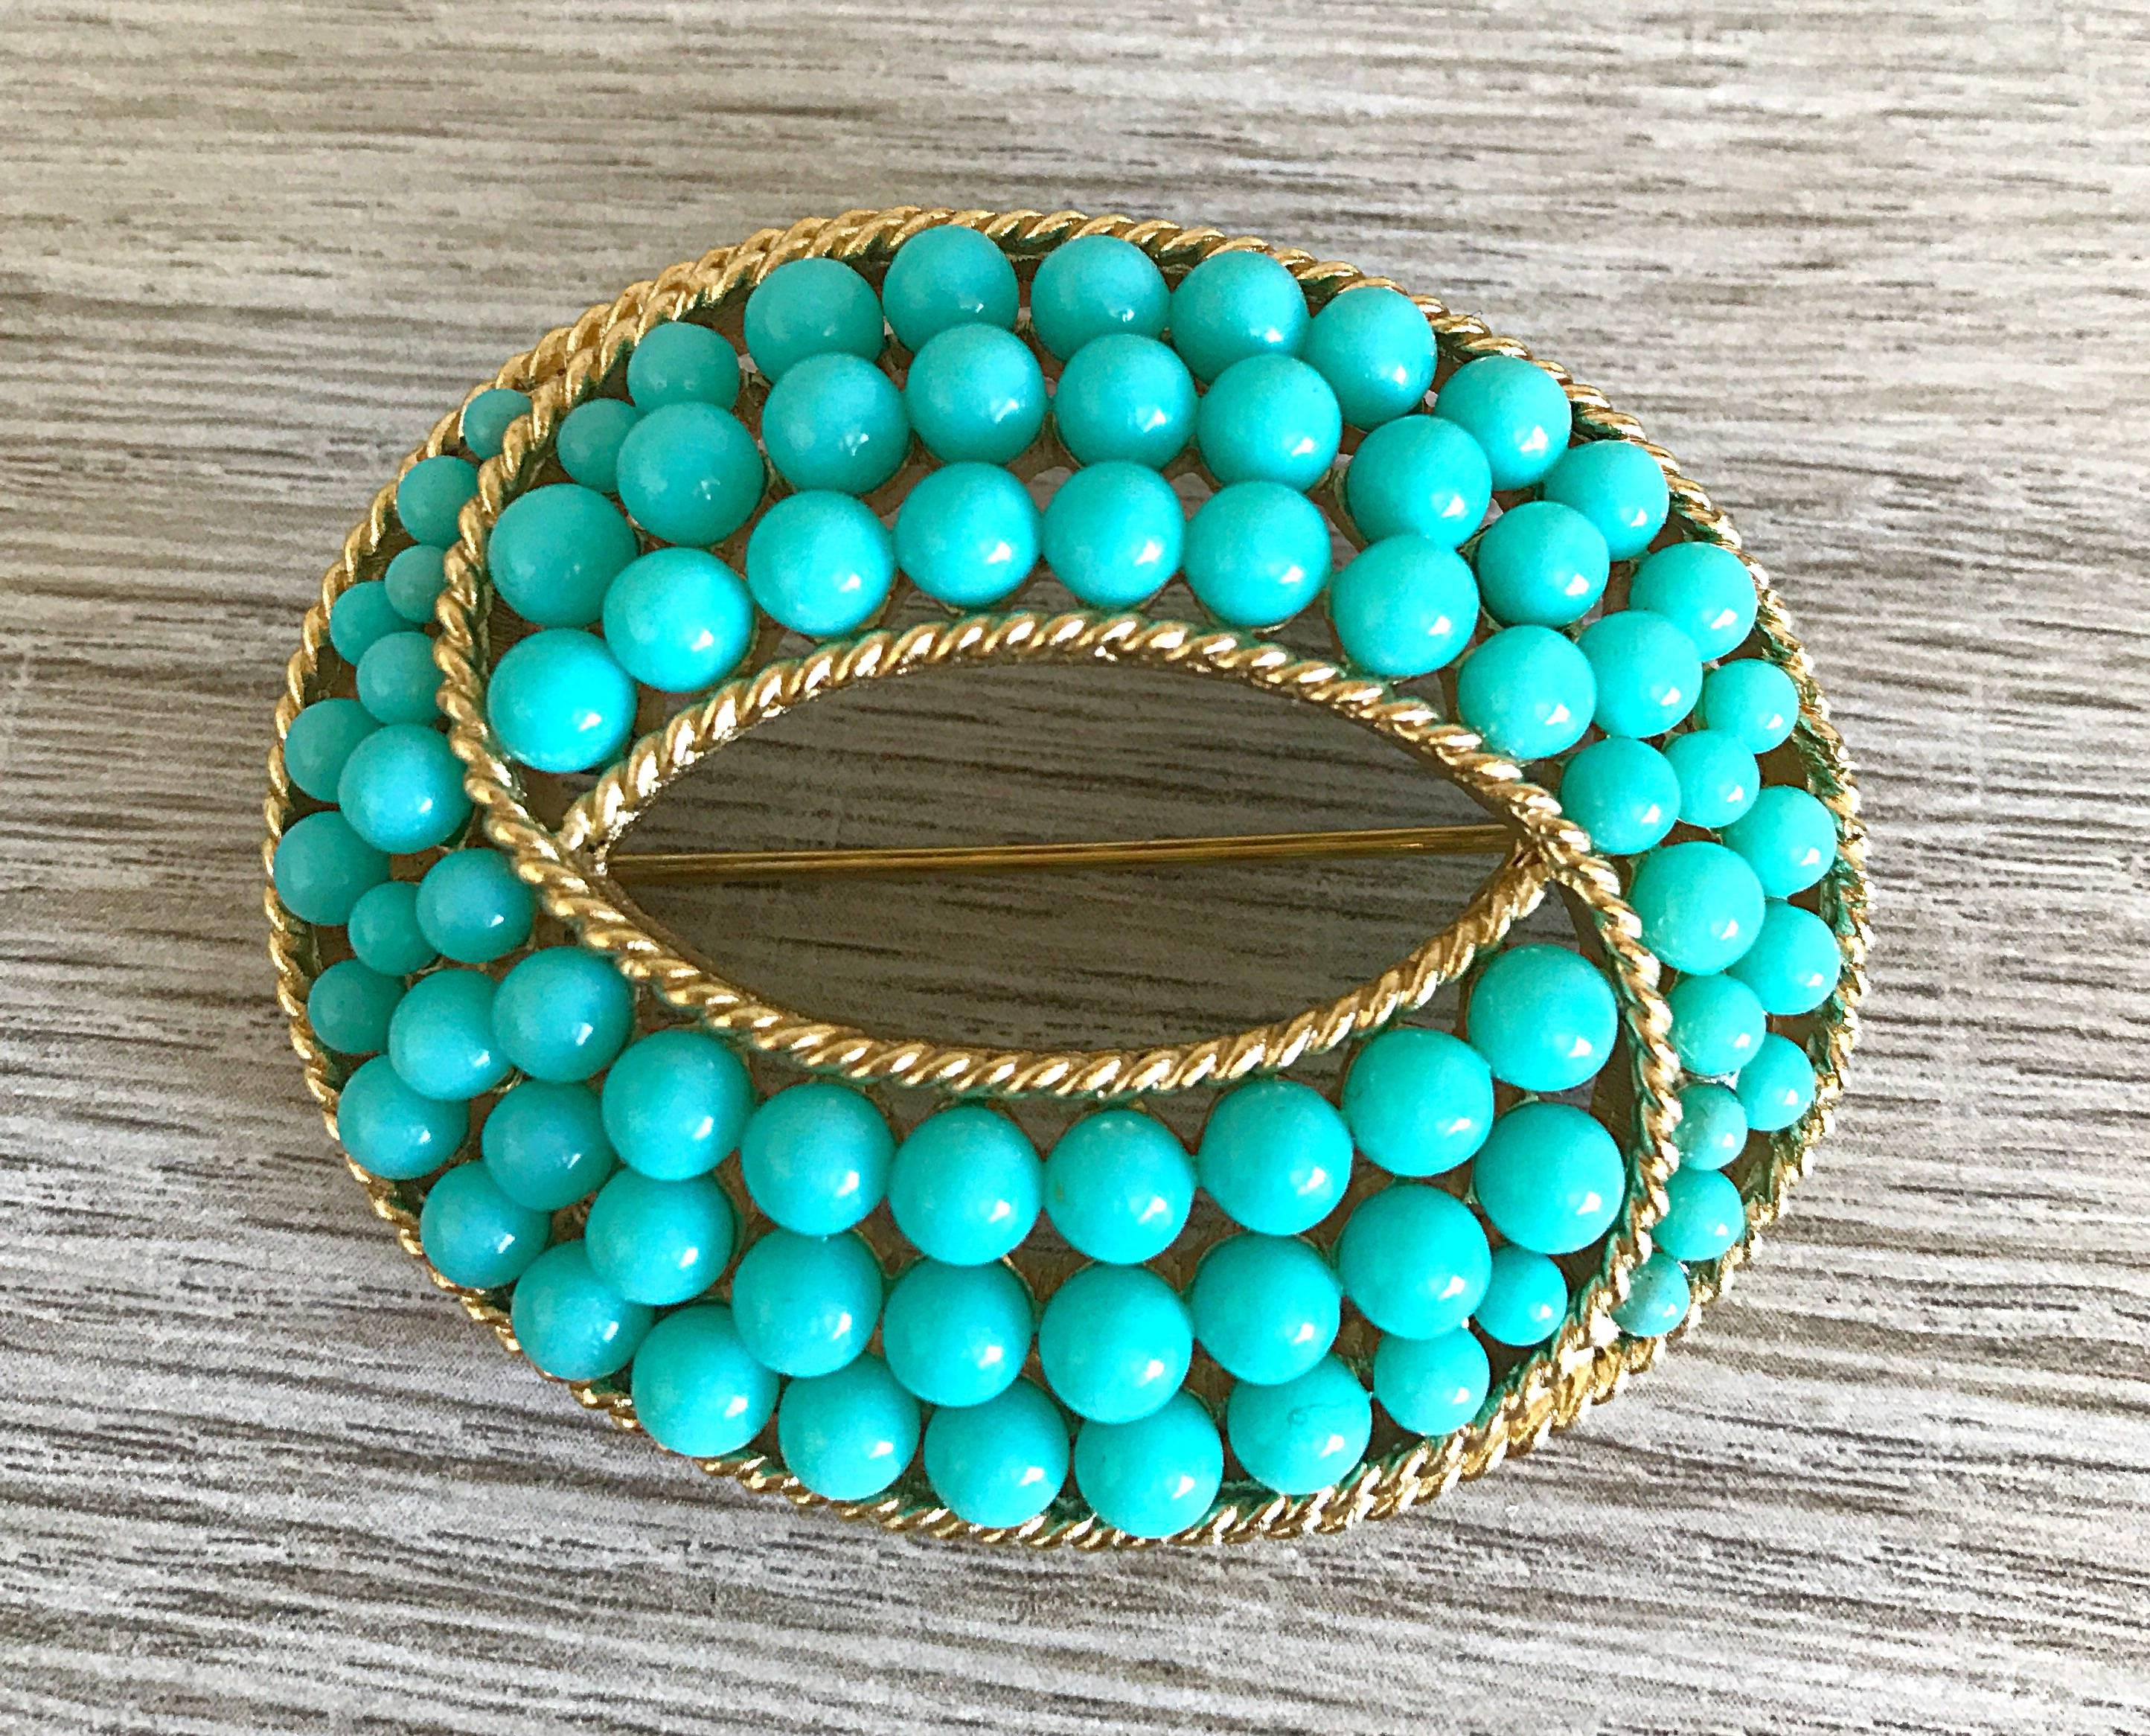 Trifari 1960s Turquoise Blue + Gold Oval 60s Signed Vintage Ball Brooch Pin 5